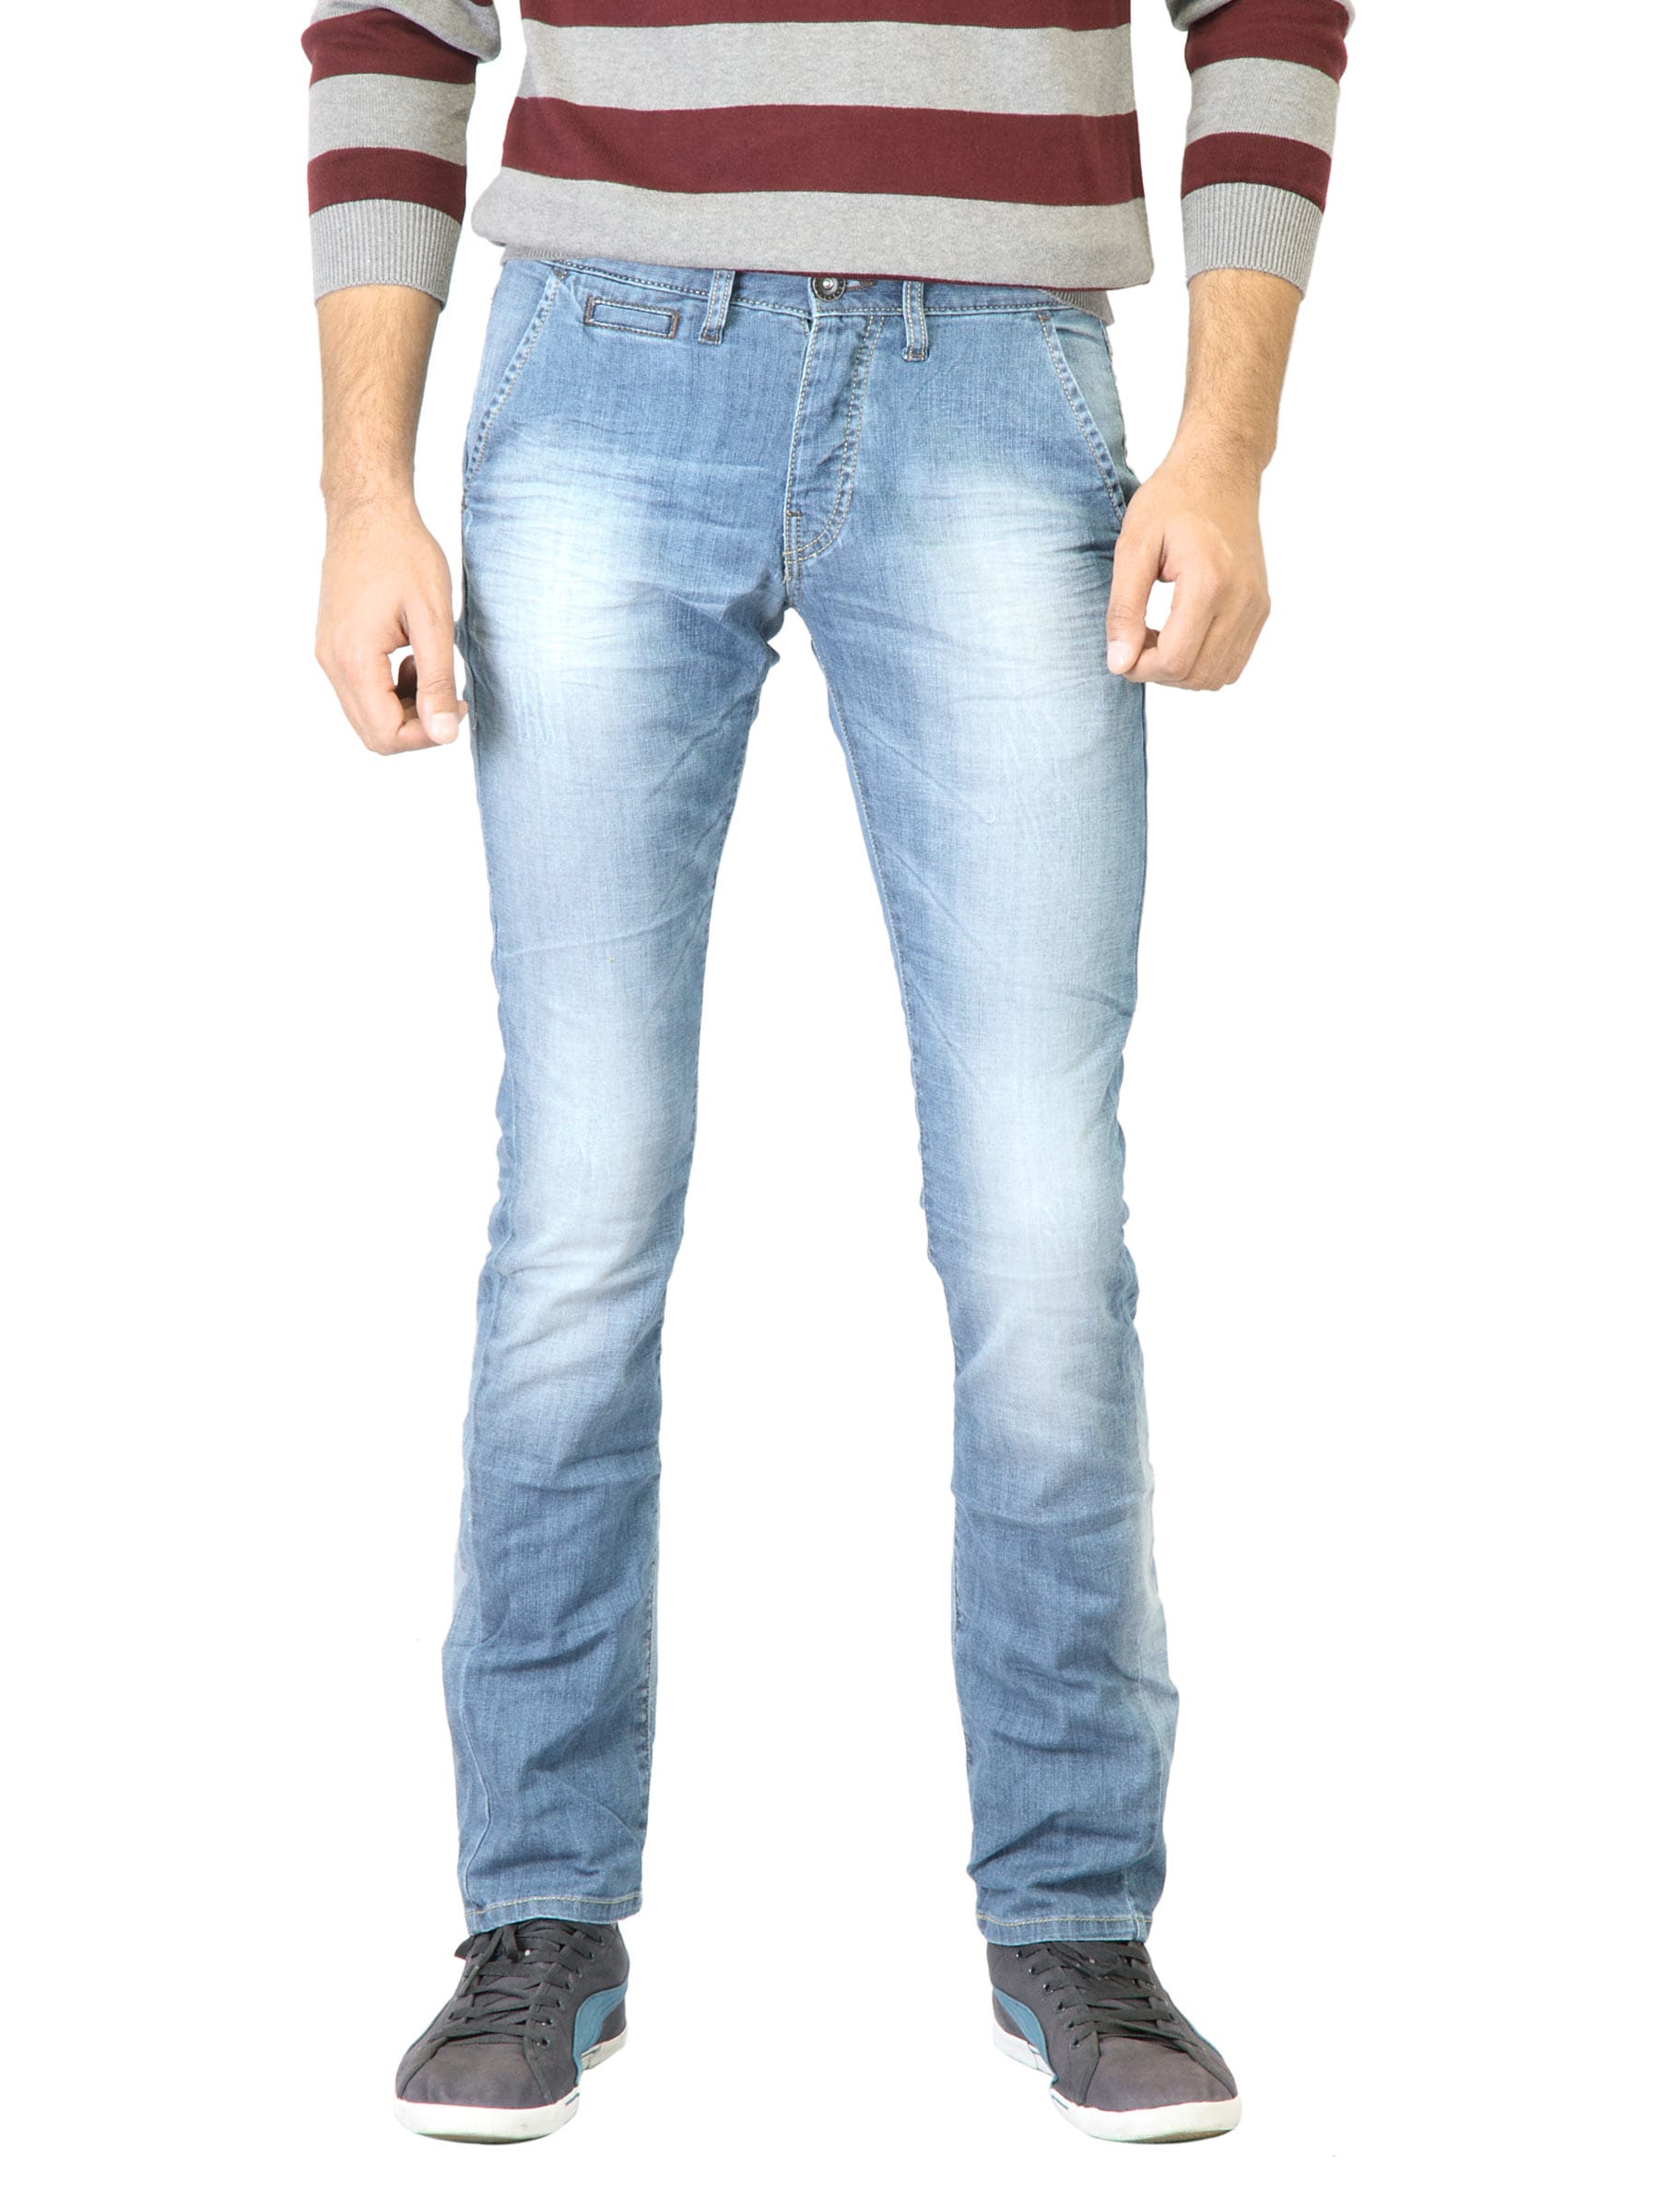 United Colors of Benetton Men Blue Washed Jeans